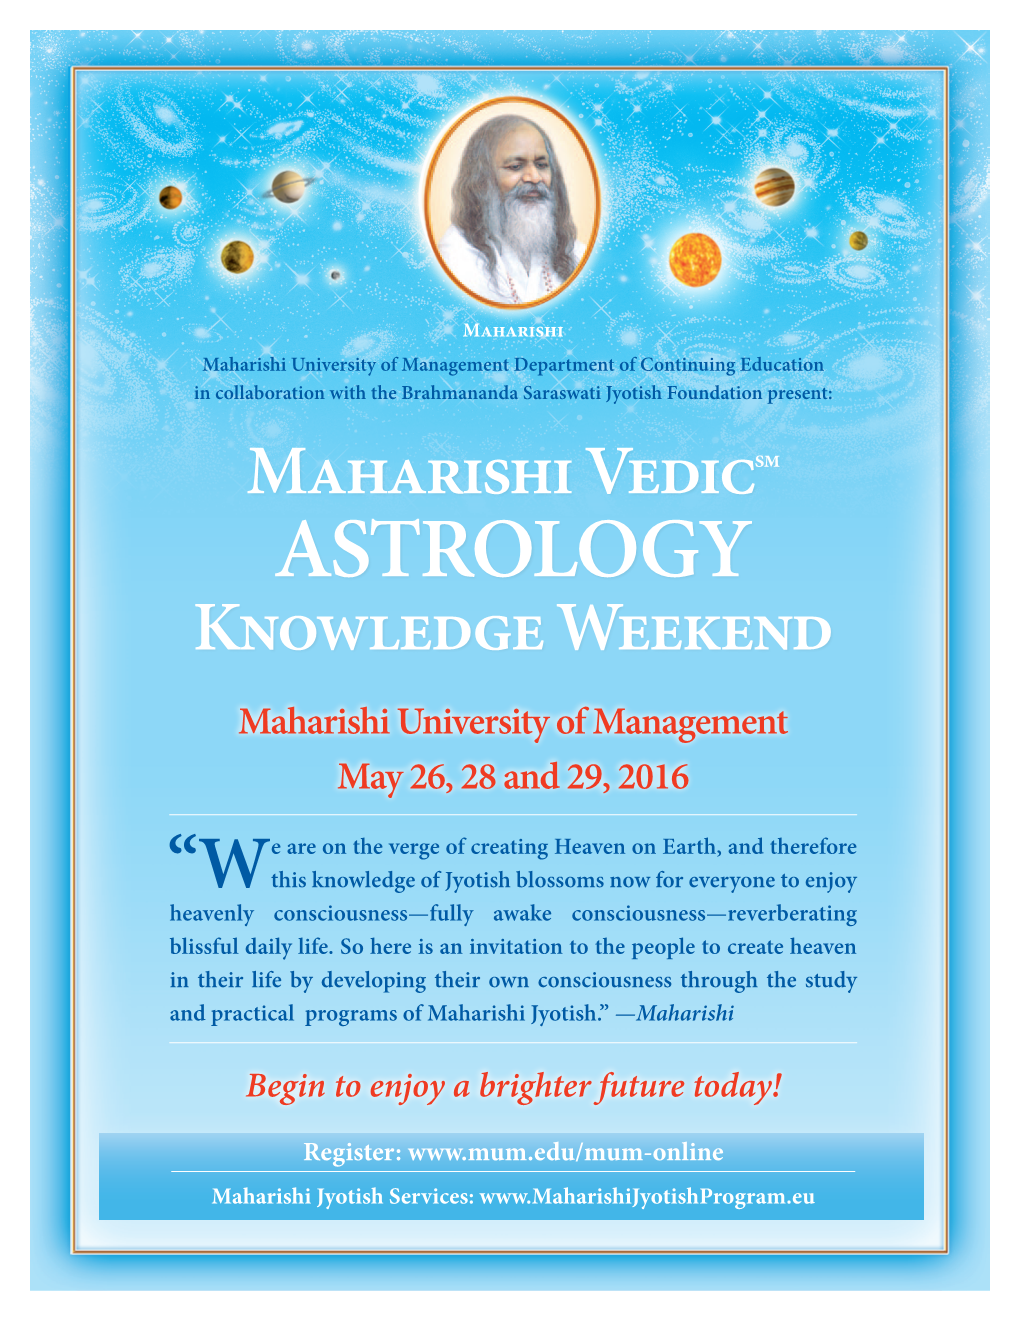 ASTROLOGY Knowledge Weekend Maharishi University of Management May 26, 28 and 29, 2016